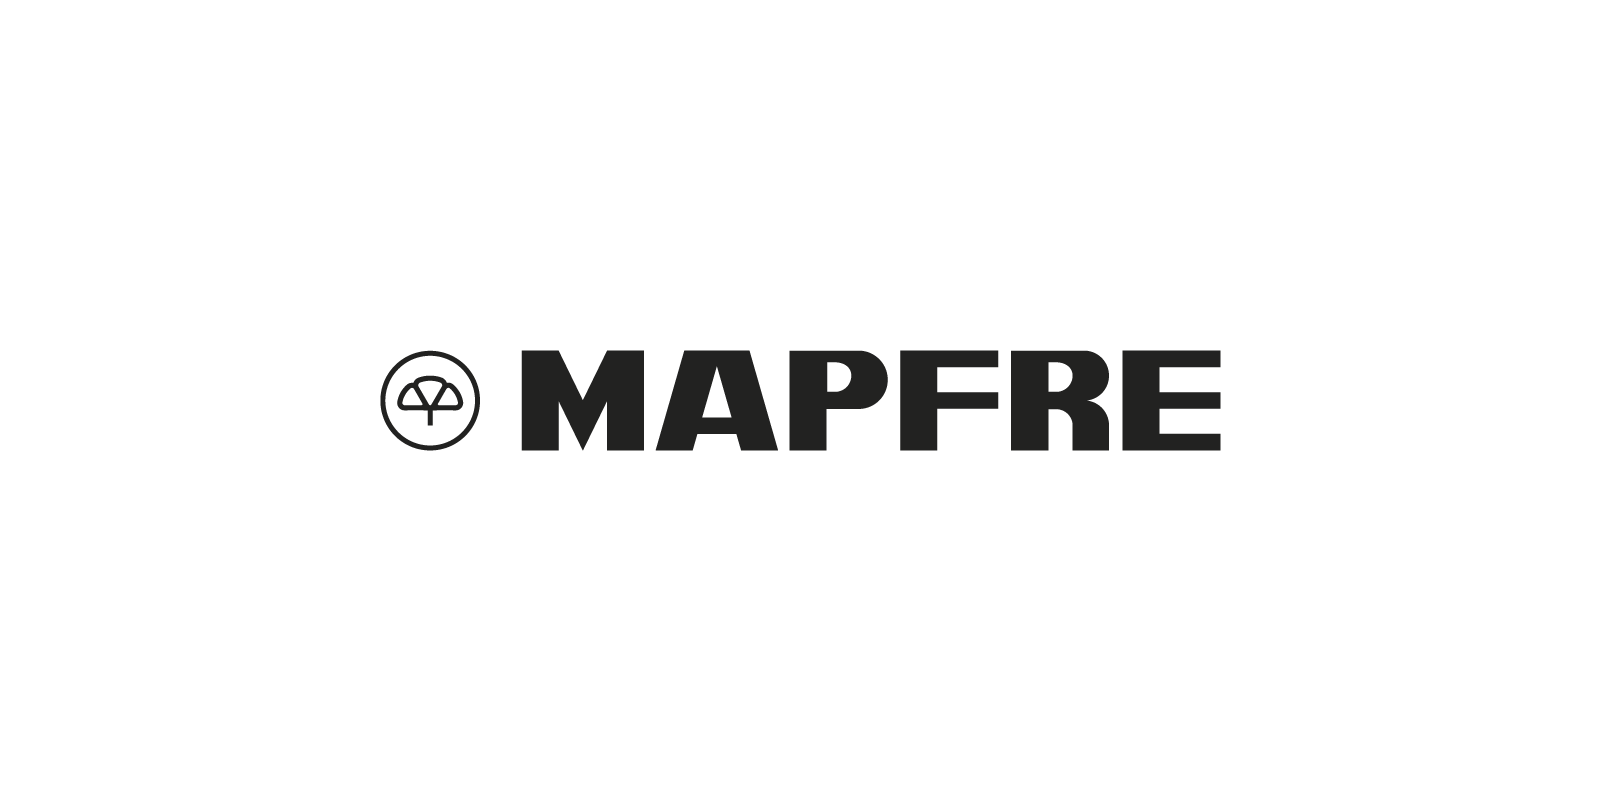 mapfre@4x.png